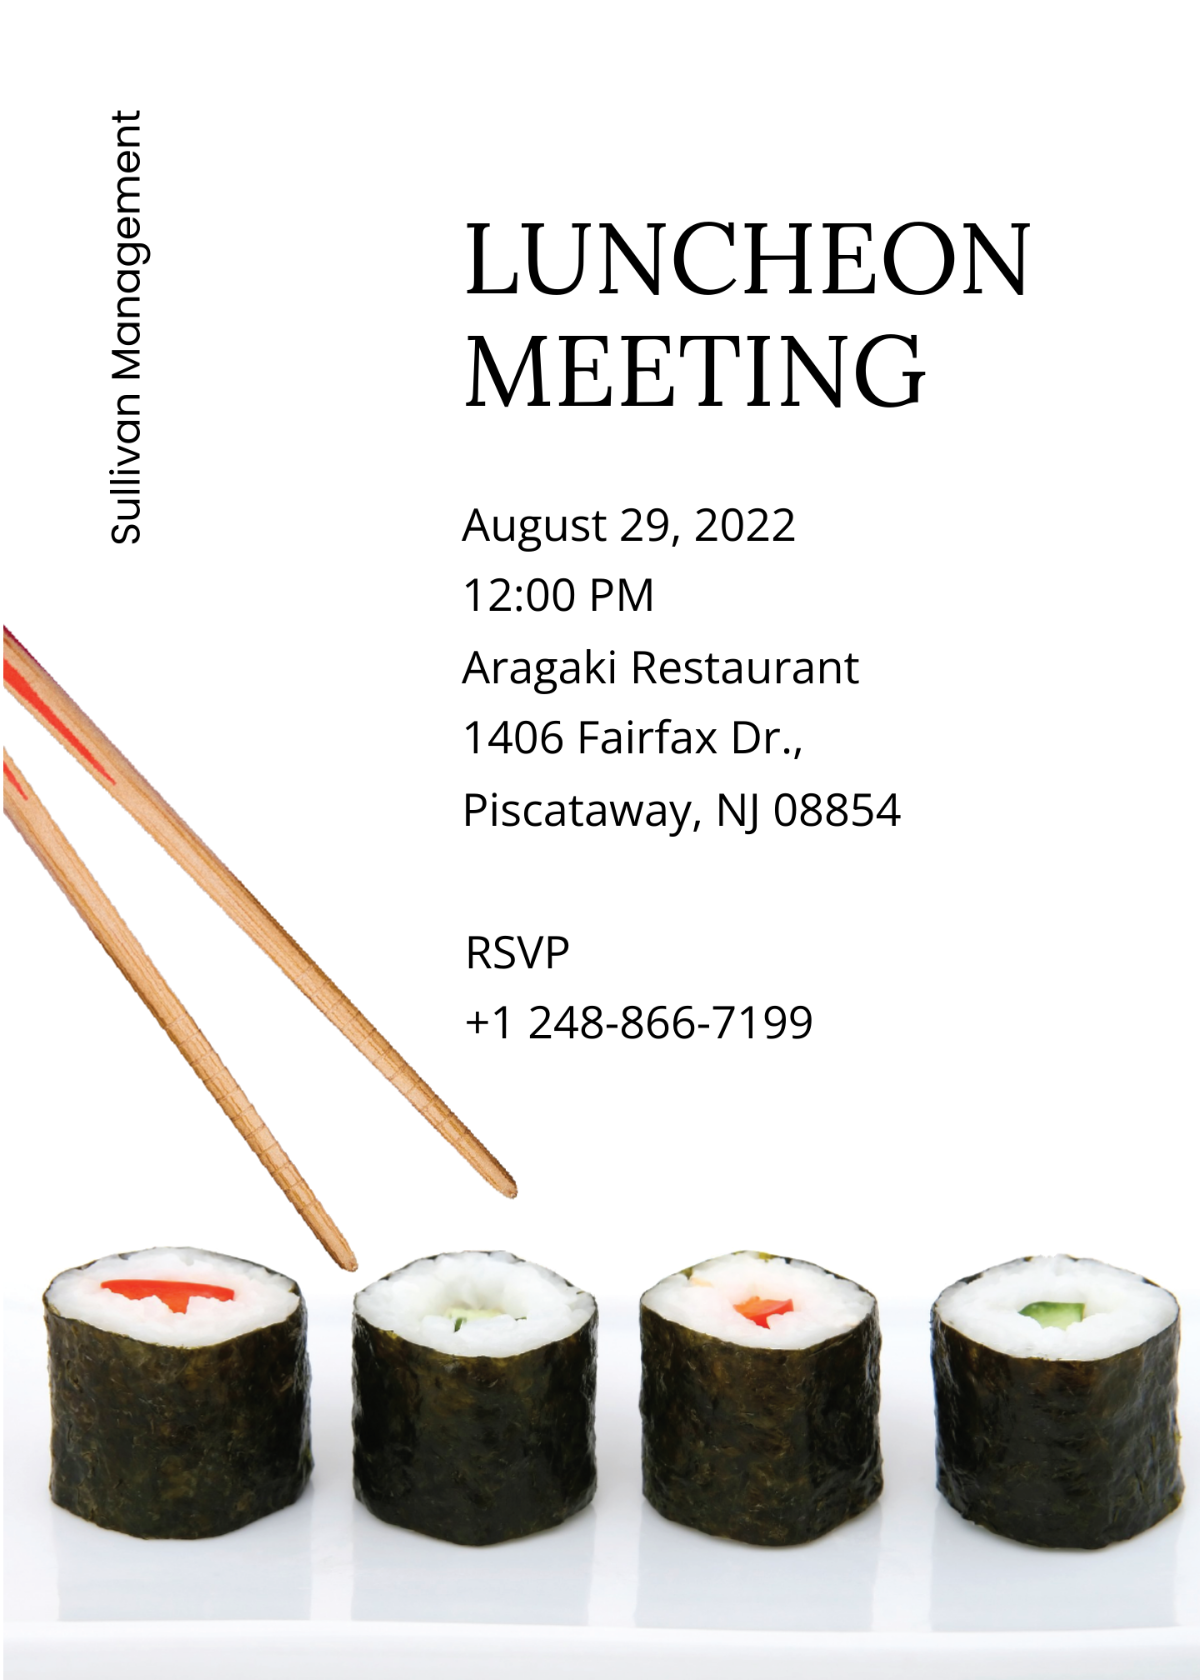 Luncheon Meeting Invitation Template